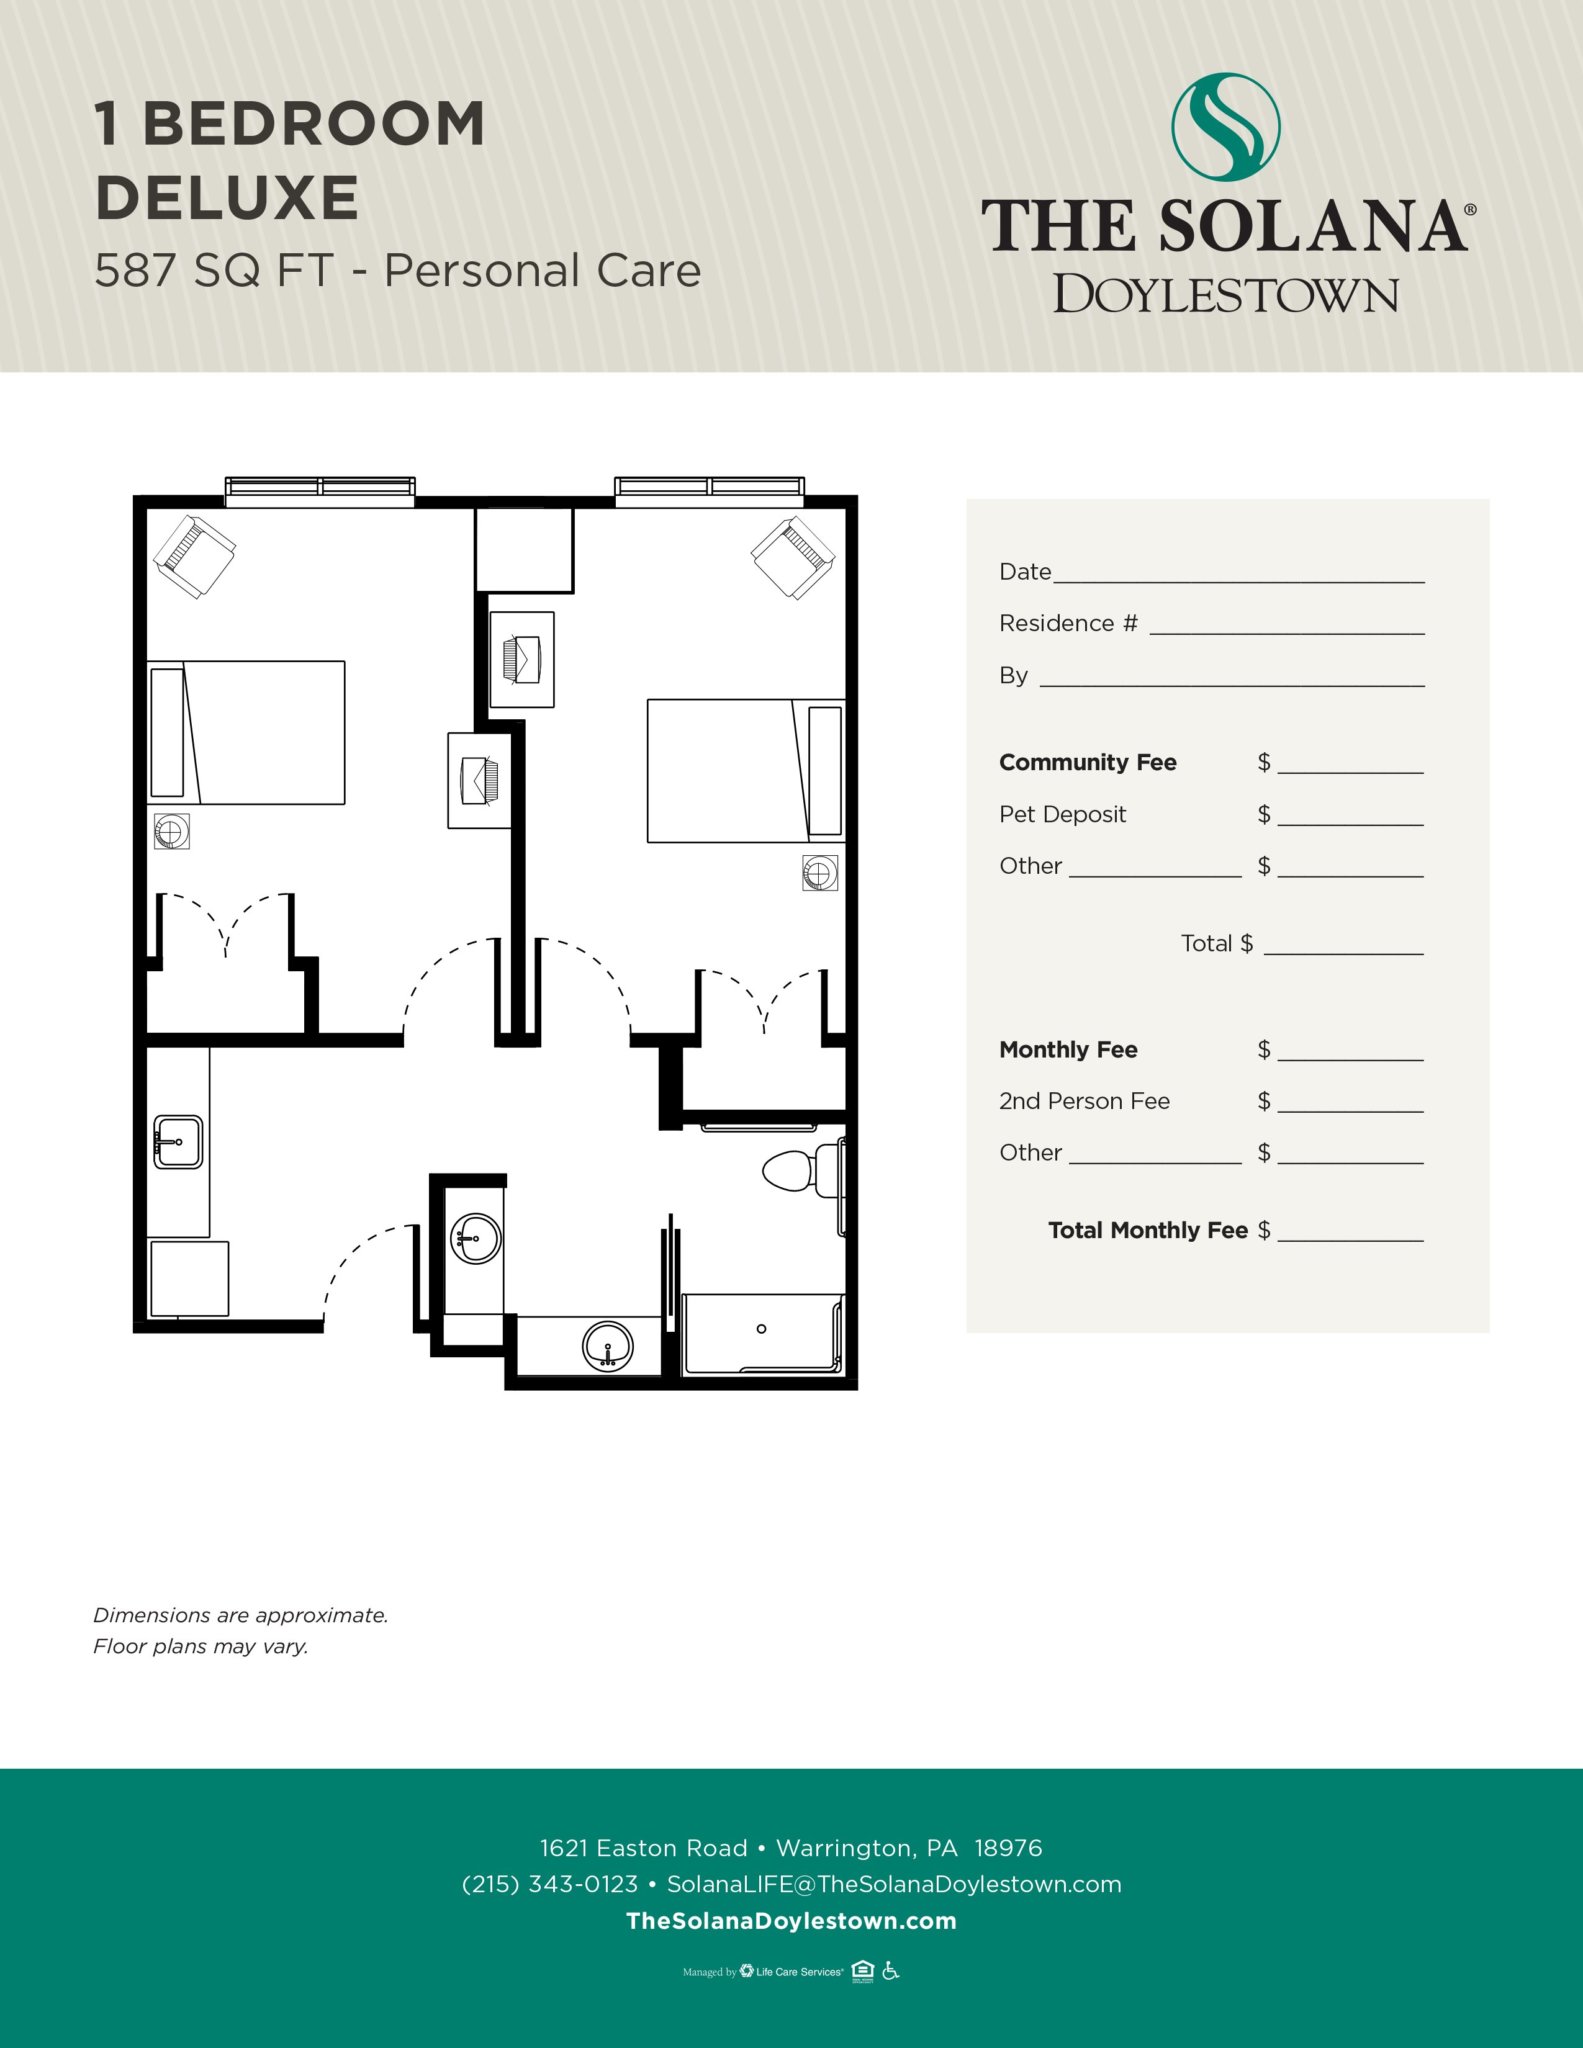 Floor plan of 1 bedroom unit, 587 sq ft, at The Solana Doylestown community with cost details.